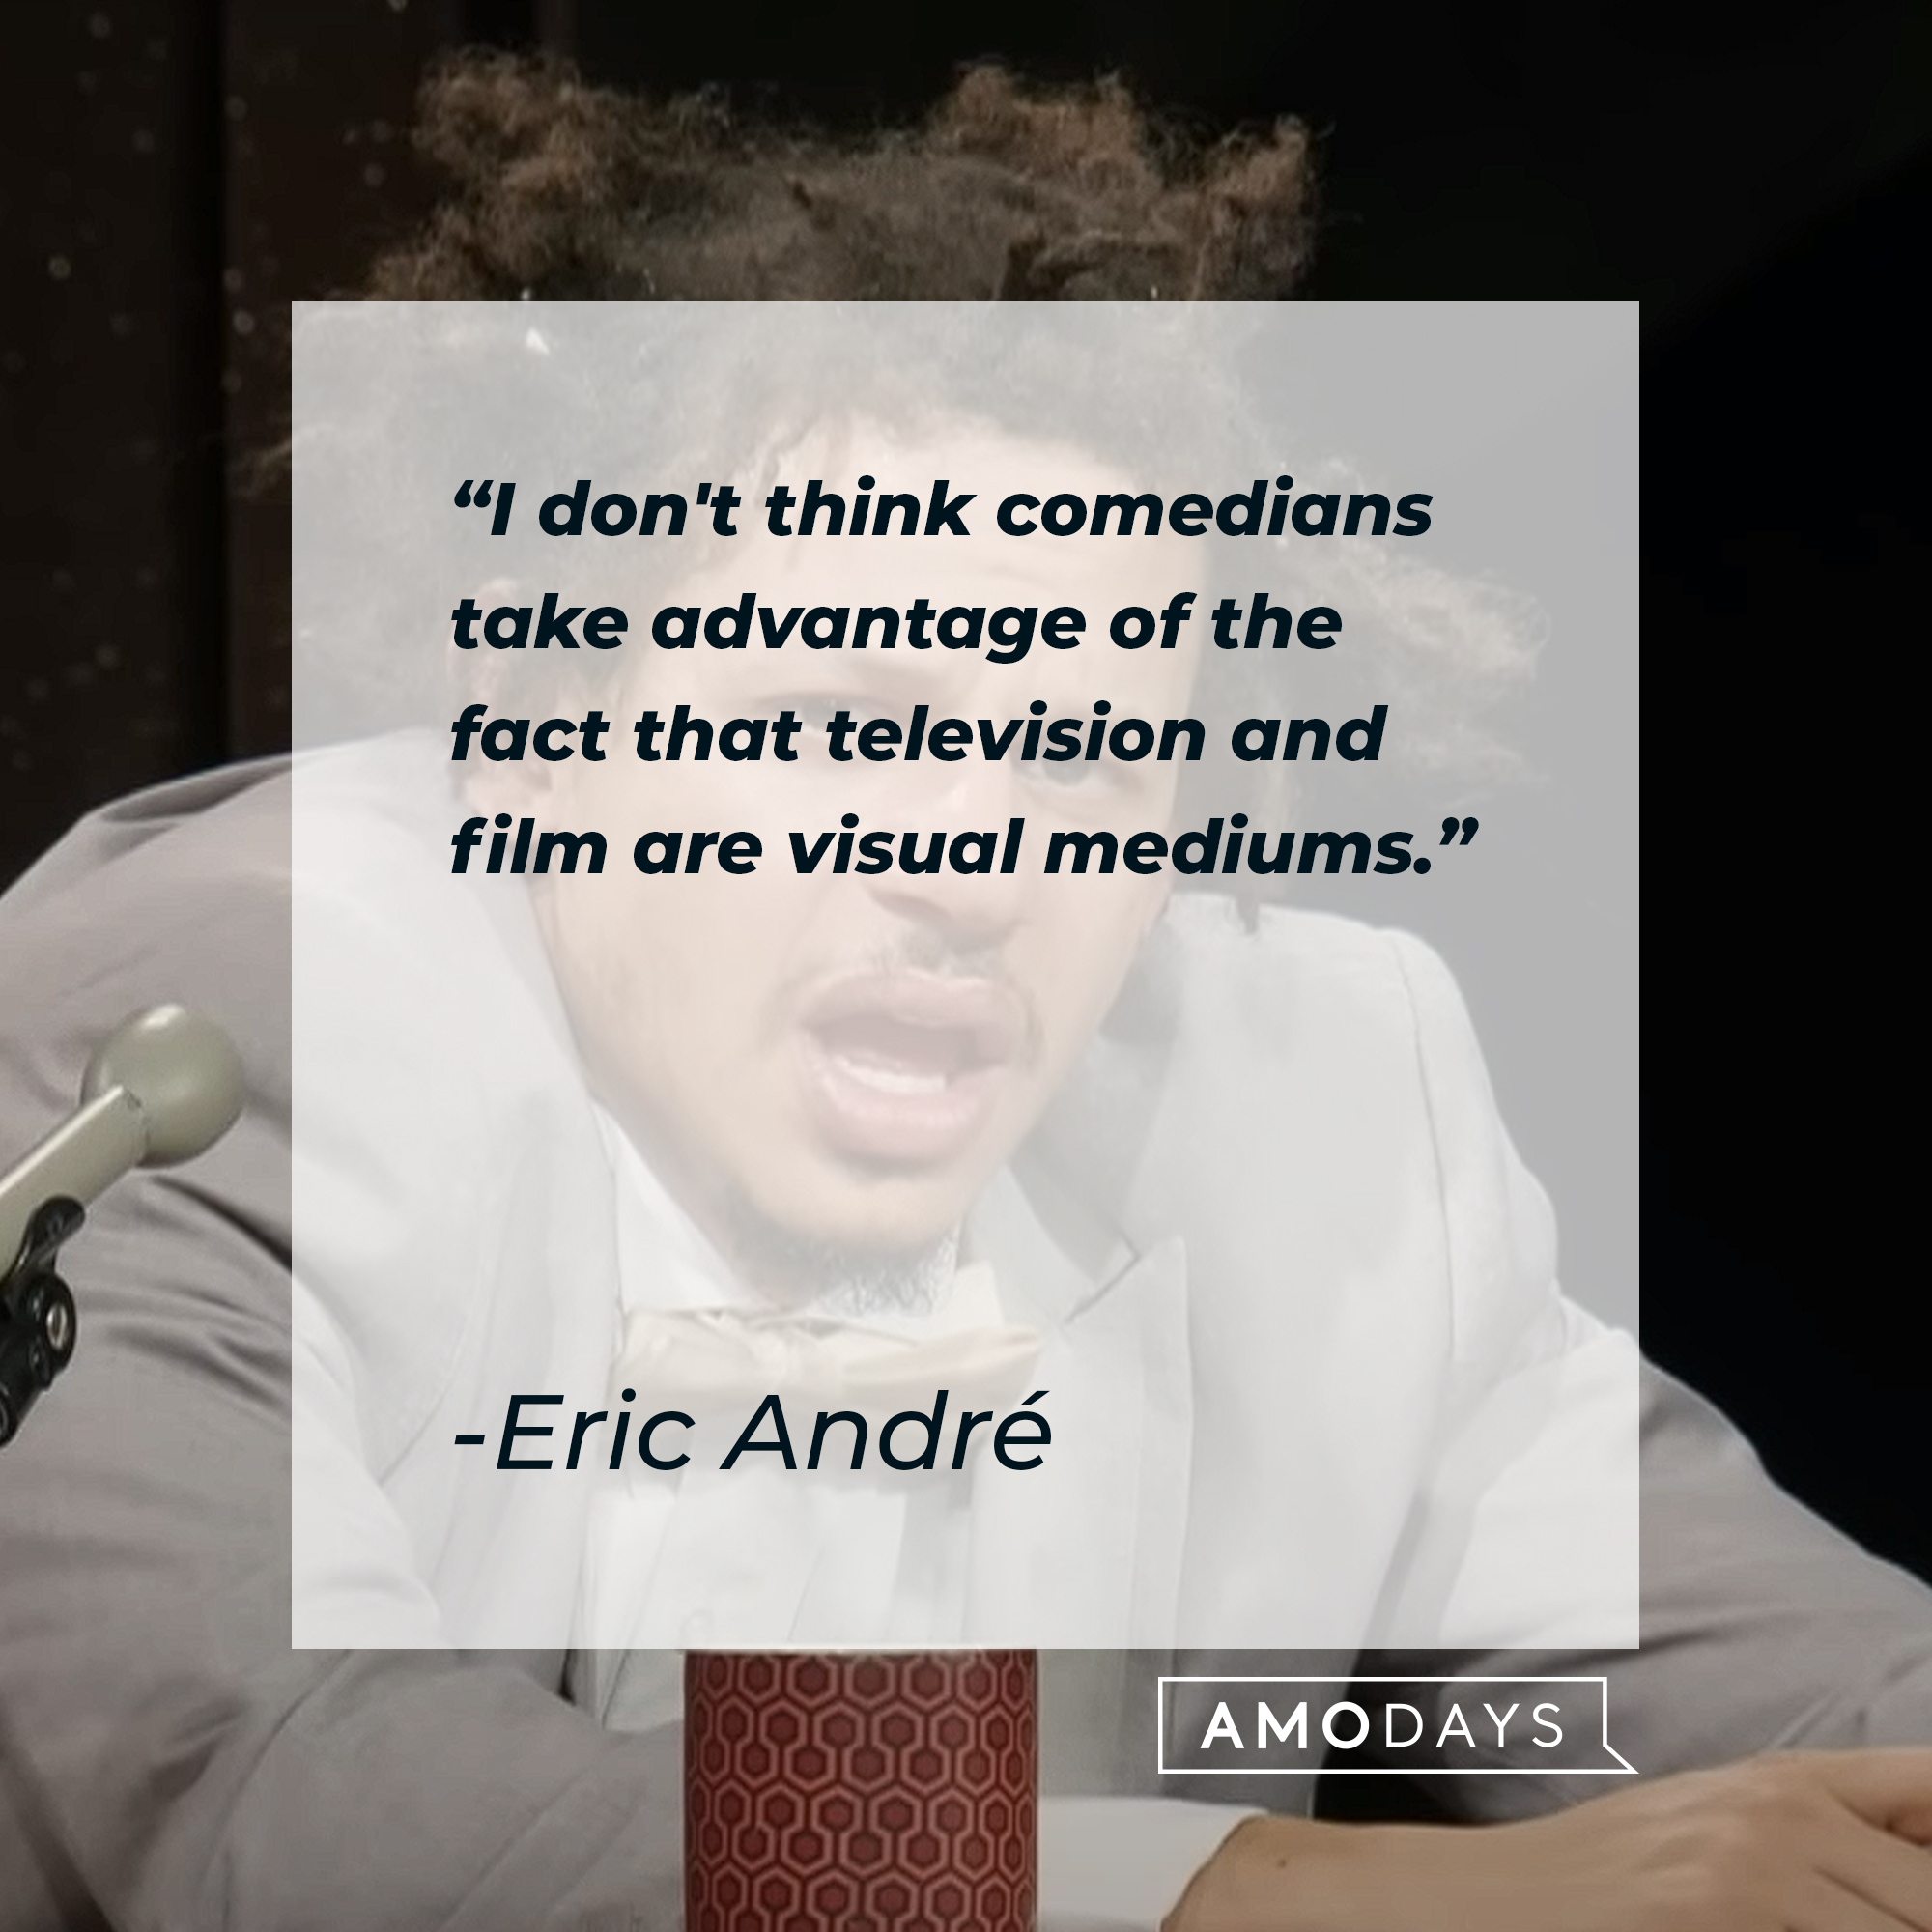 Eric André's quote: "I don't think comedians take advantage of the fact that television and film are visual mediums." | Source: Youtube.com/adultswim